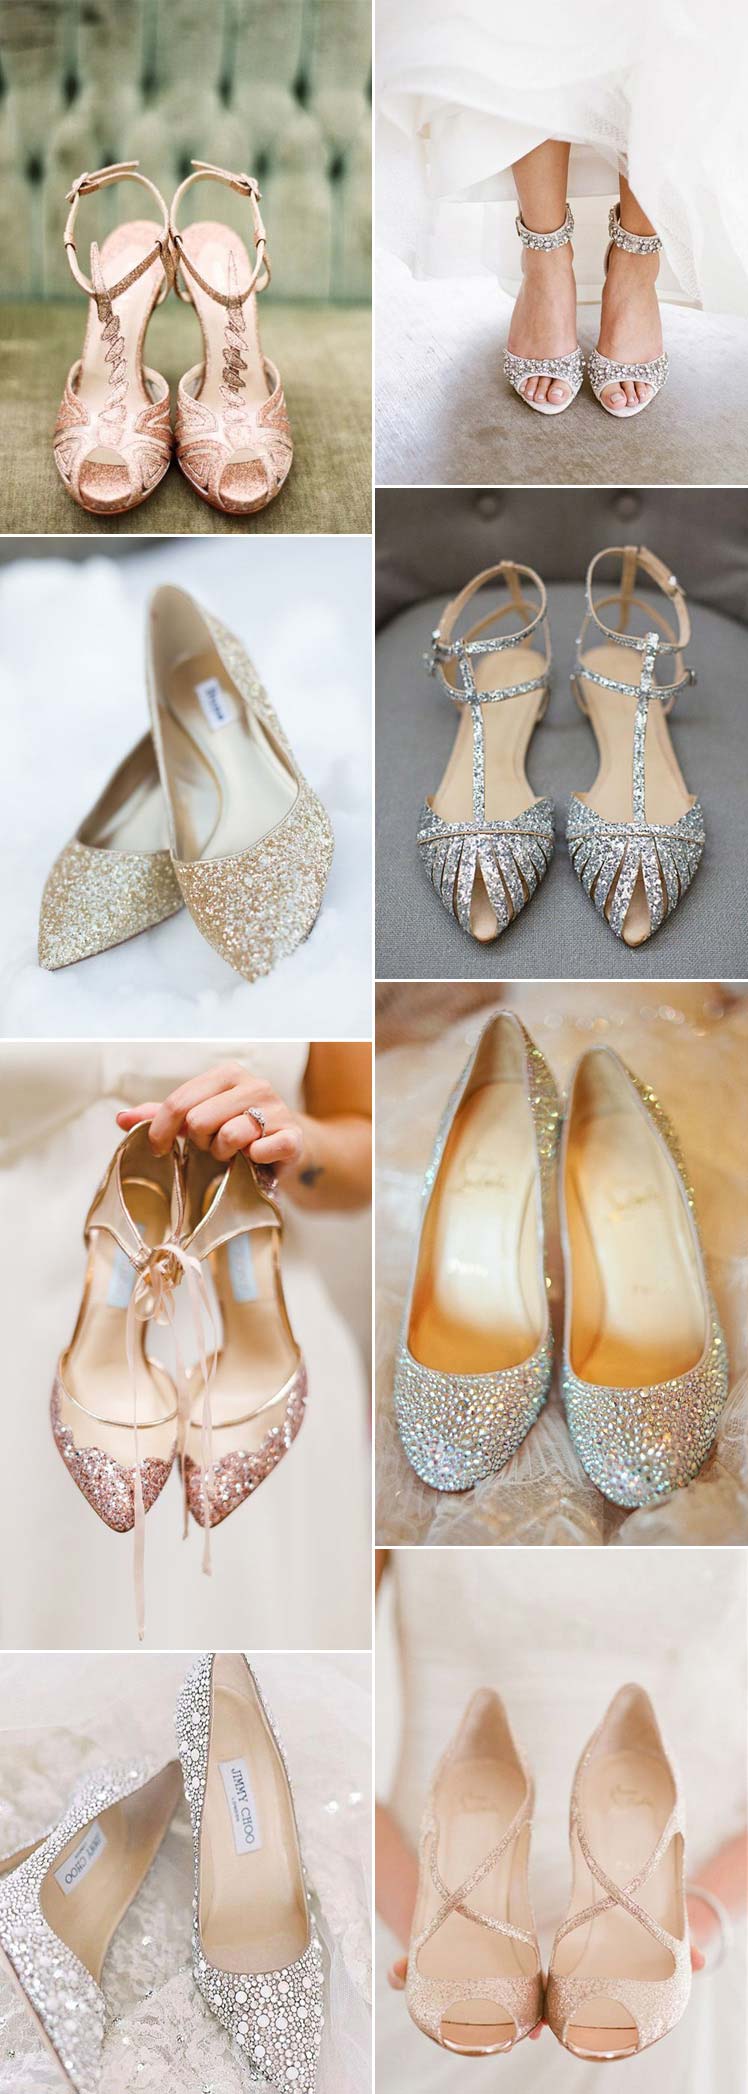 Stepping Out in Sparkly Wedding Shoes - Glitzy Secrets